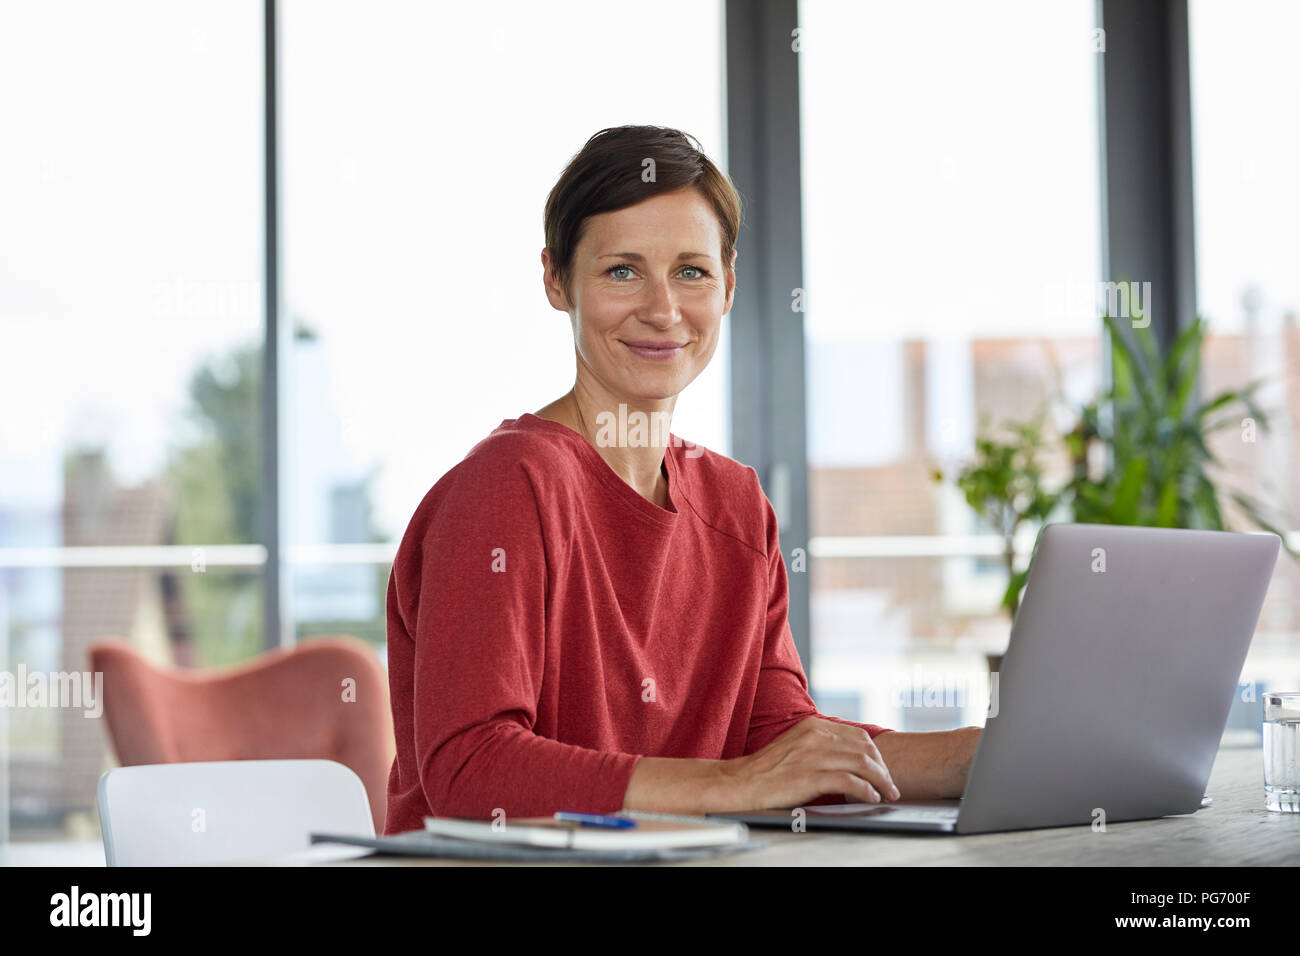 Portrait of smiling woman sitting at table at home using laptop Banque D'Images